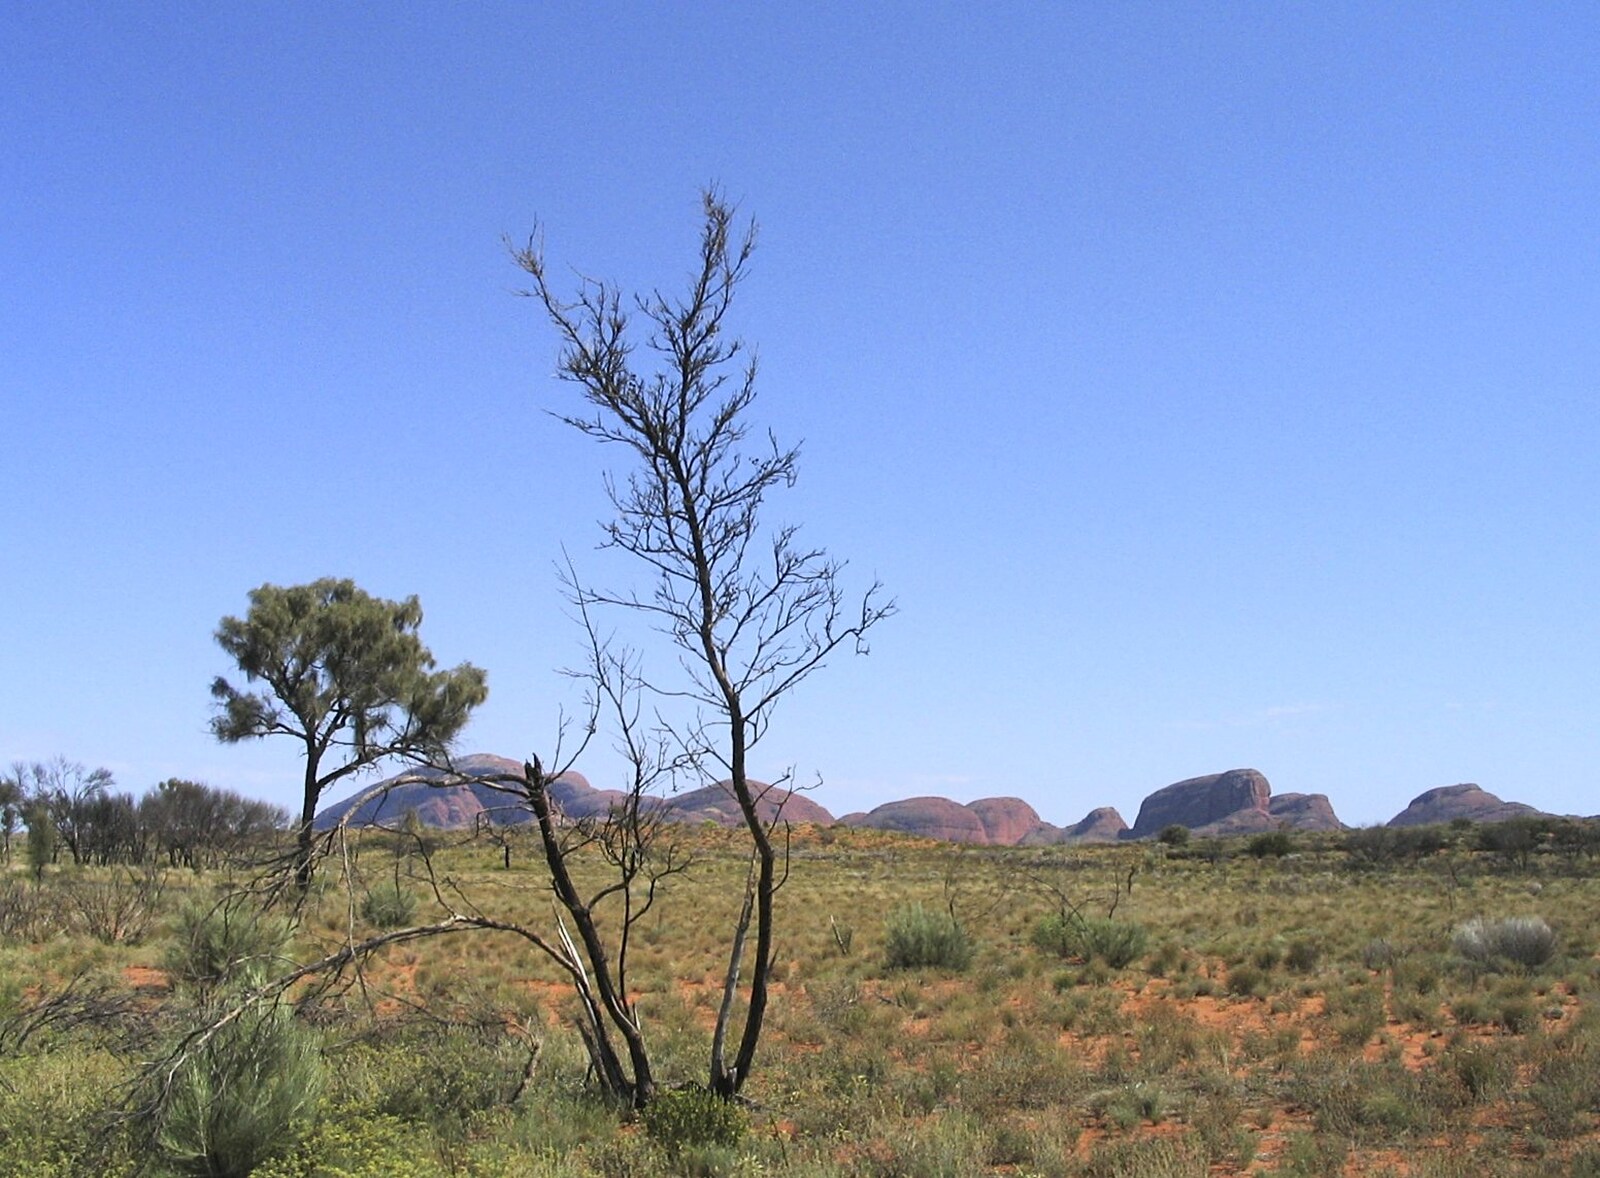 More lonely trees from The Red Centre: Yulara and Uluru, Northern Territories, Australia - 8th October 2004